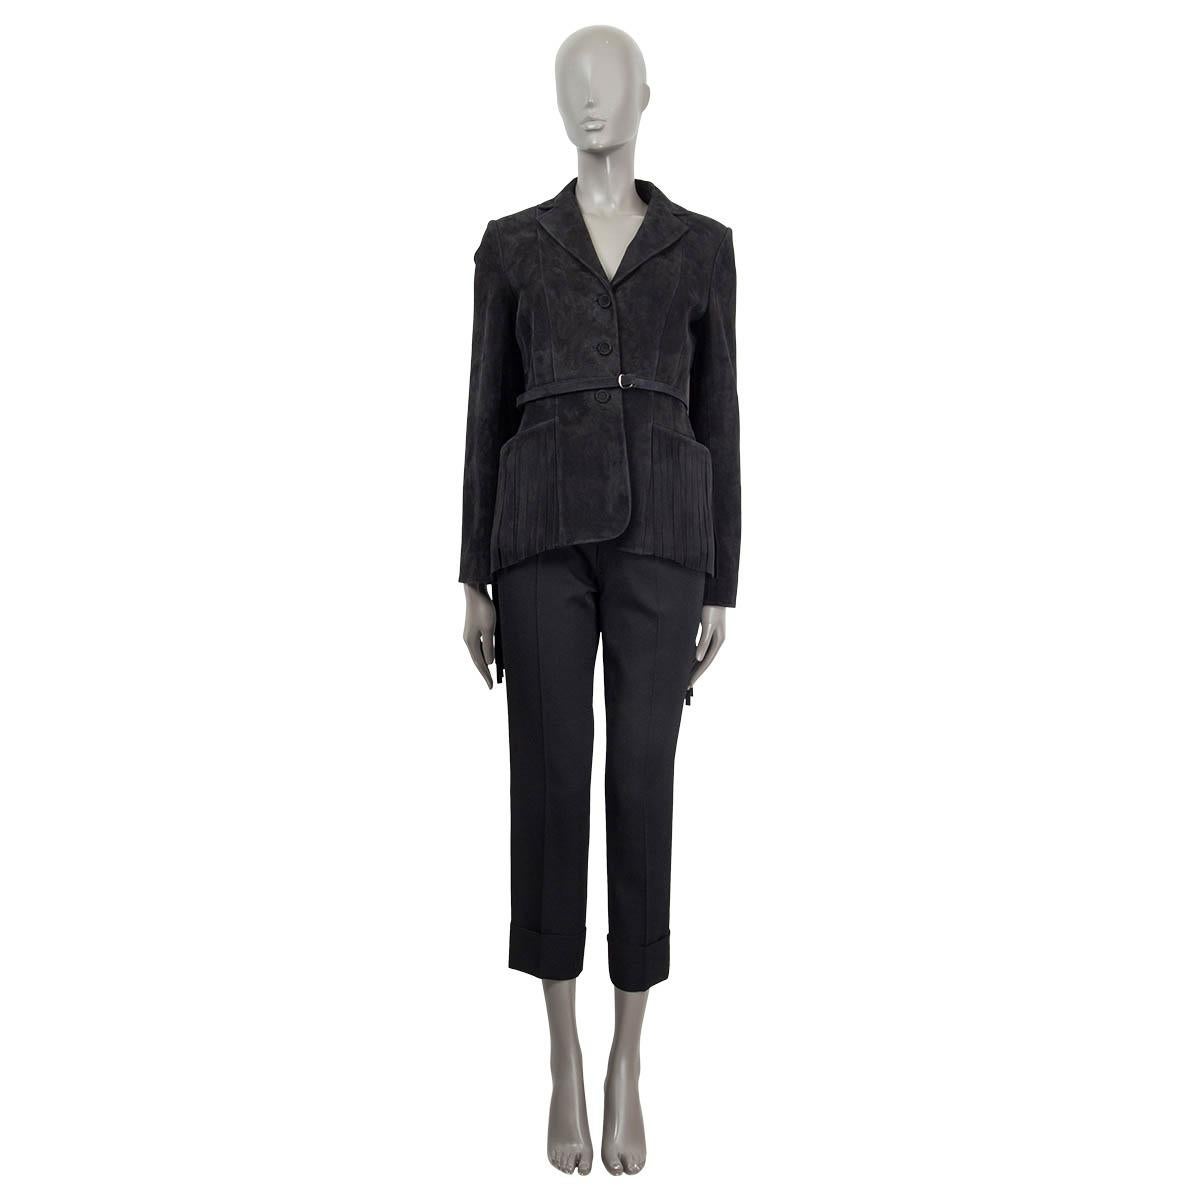 100% authentic Christian Dior 2018 resort collection suede jacket in black lamb leather (100%). Features two fringed slit pockets and sleeves. Opens with three black suede buttons in the front and comes with tag and matching belt. Brand new.